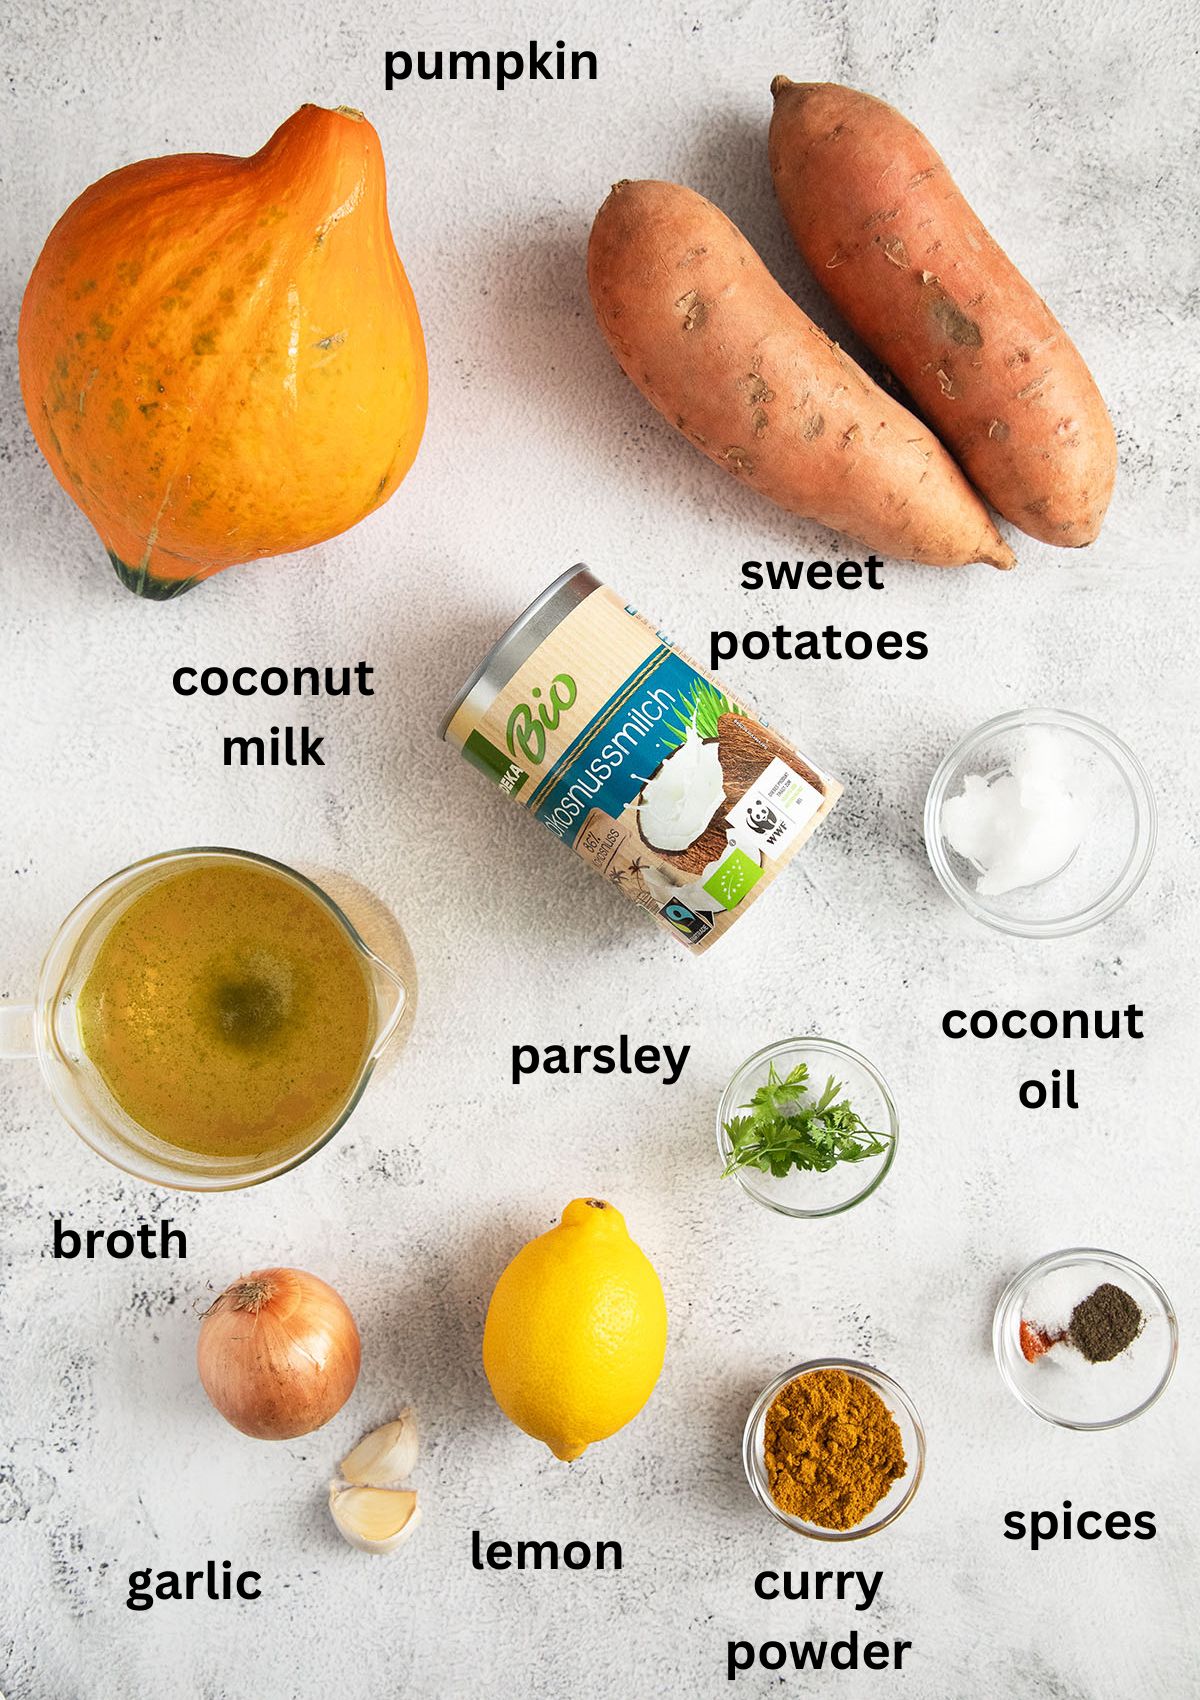 listed ingredients for making sweet potato and pumpkin soup with coconut milk and curry.